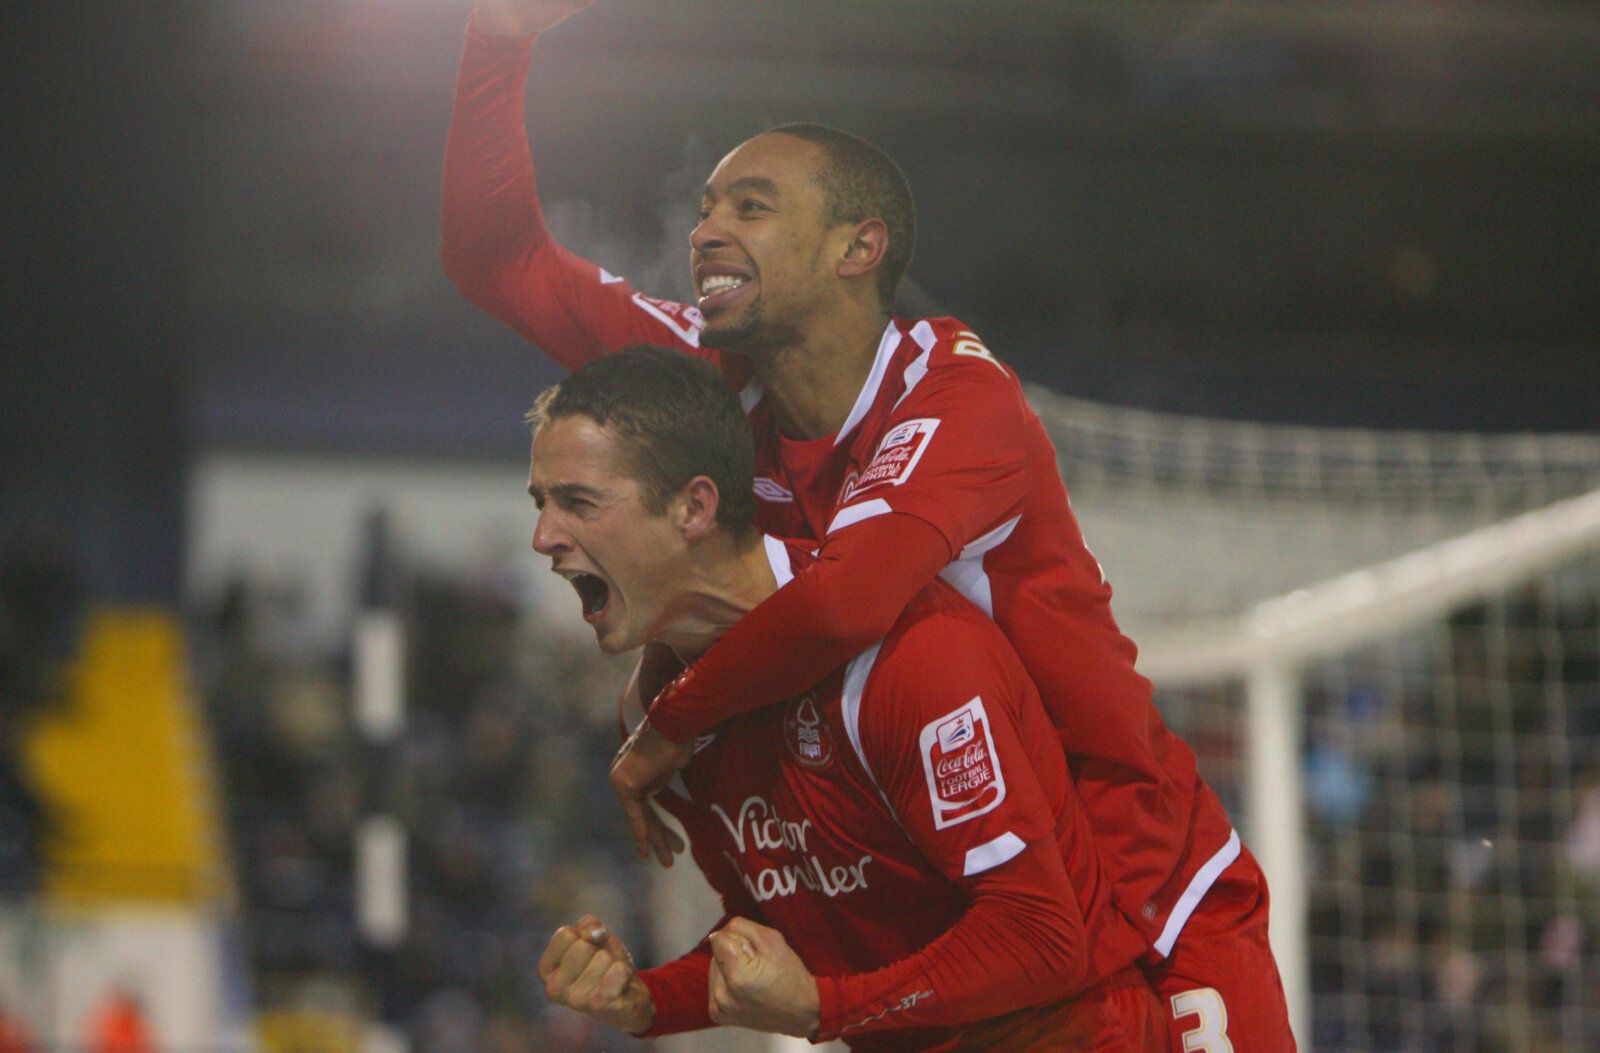 Football - West Bromwich Albion v Nottingham Forest - Coca-Cola Football League Championship - The Hawthorns - 09/10 - 8/1/10 
Chris Cohen (L) - Nottingham Forest celebrates after scoring his teams third goal with Dexter Blackstock 
Mandatory Credit: Action Images / Carl Recine